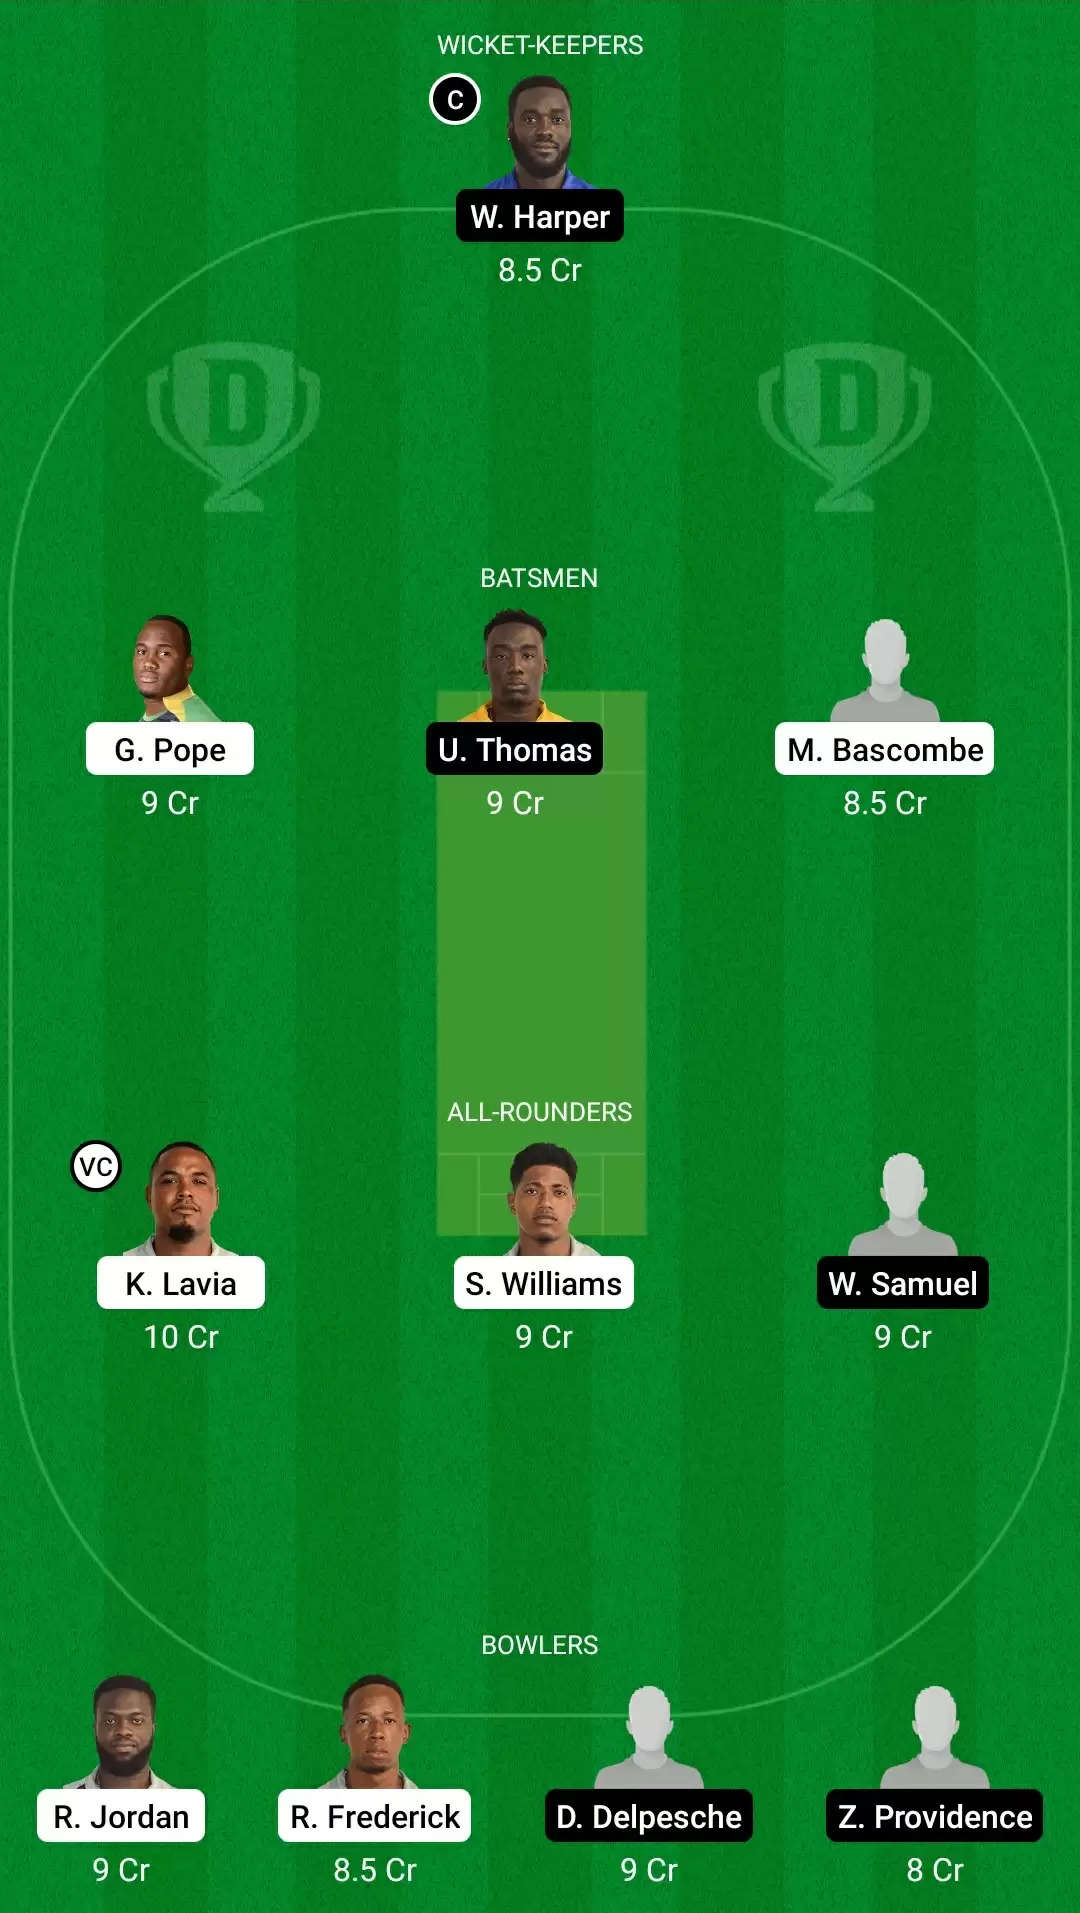 Vincy Premier League 2021, Match 15: FCS vs BGR Dream11 Prediction, Fantasy Cricket Tips, Team, Playing 11, Pitch Report, Weather Conditions and Injury Update